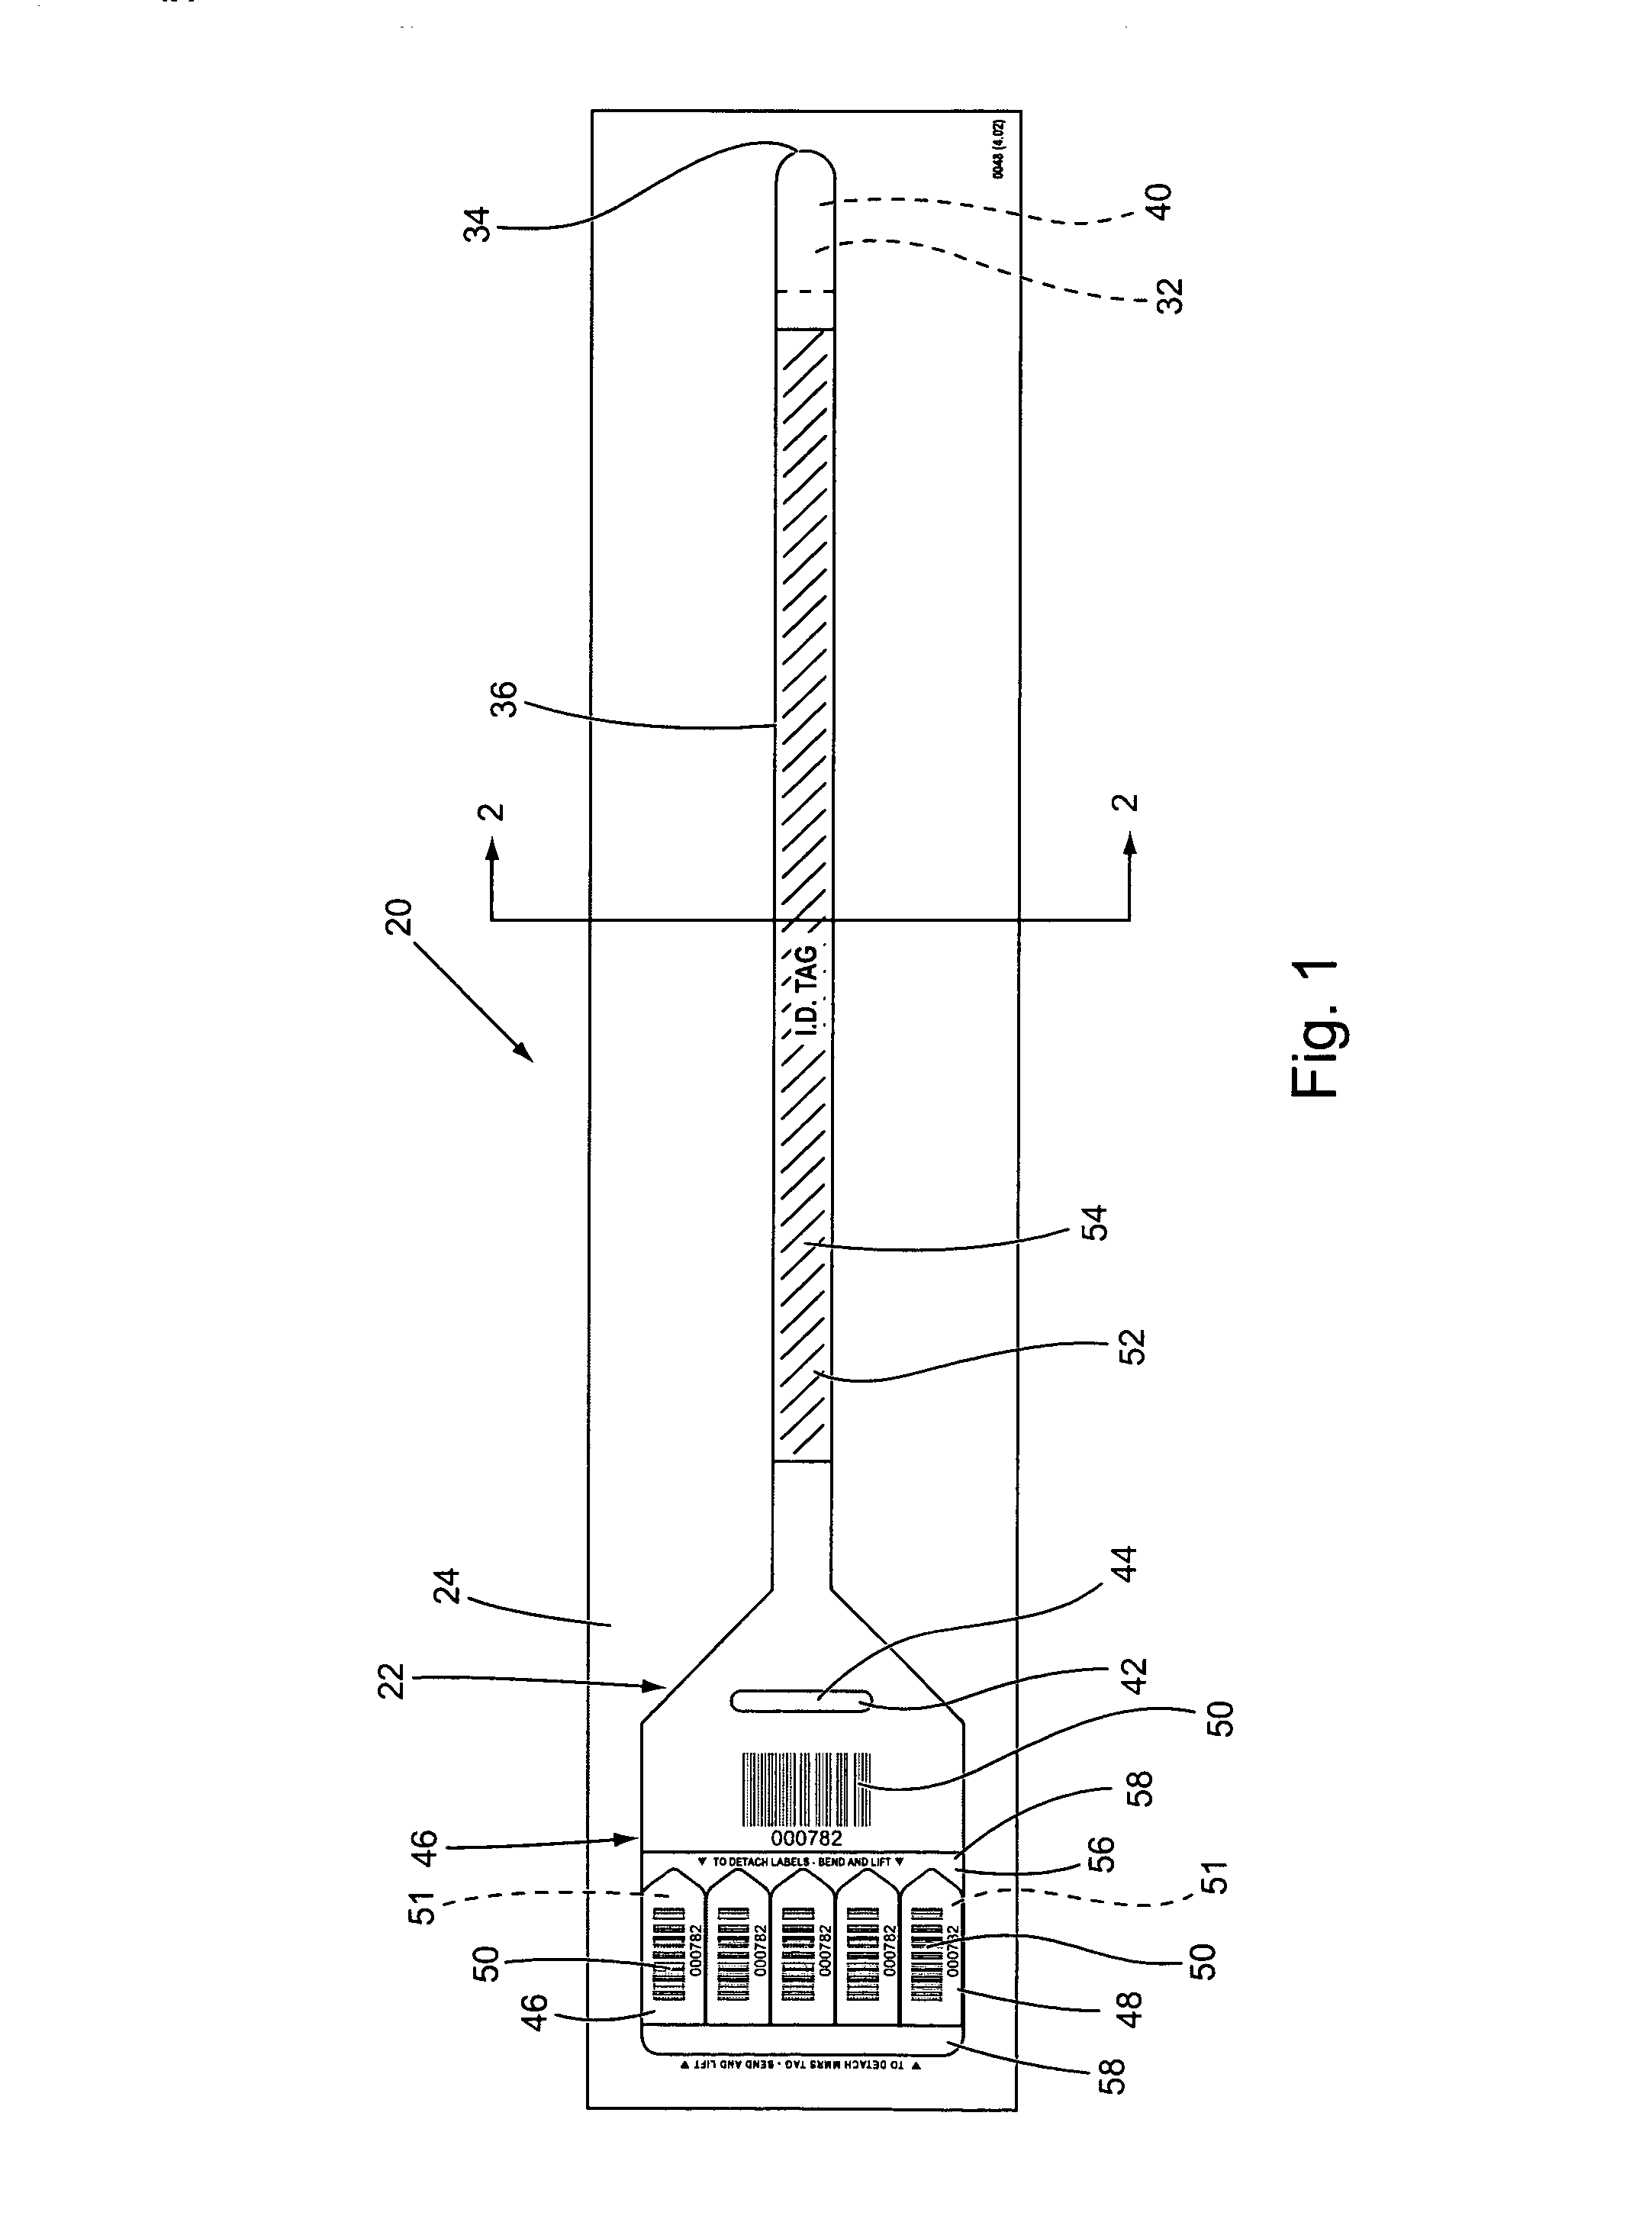 Wristband/cinch with label assembly business form and method